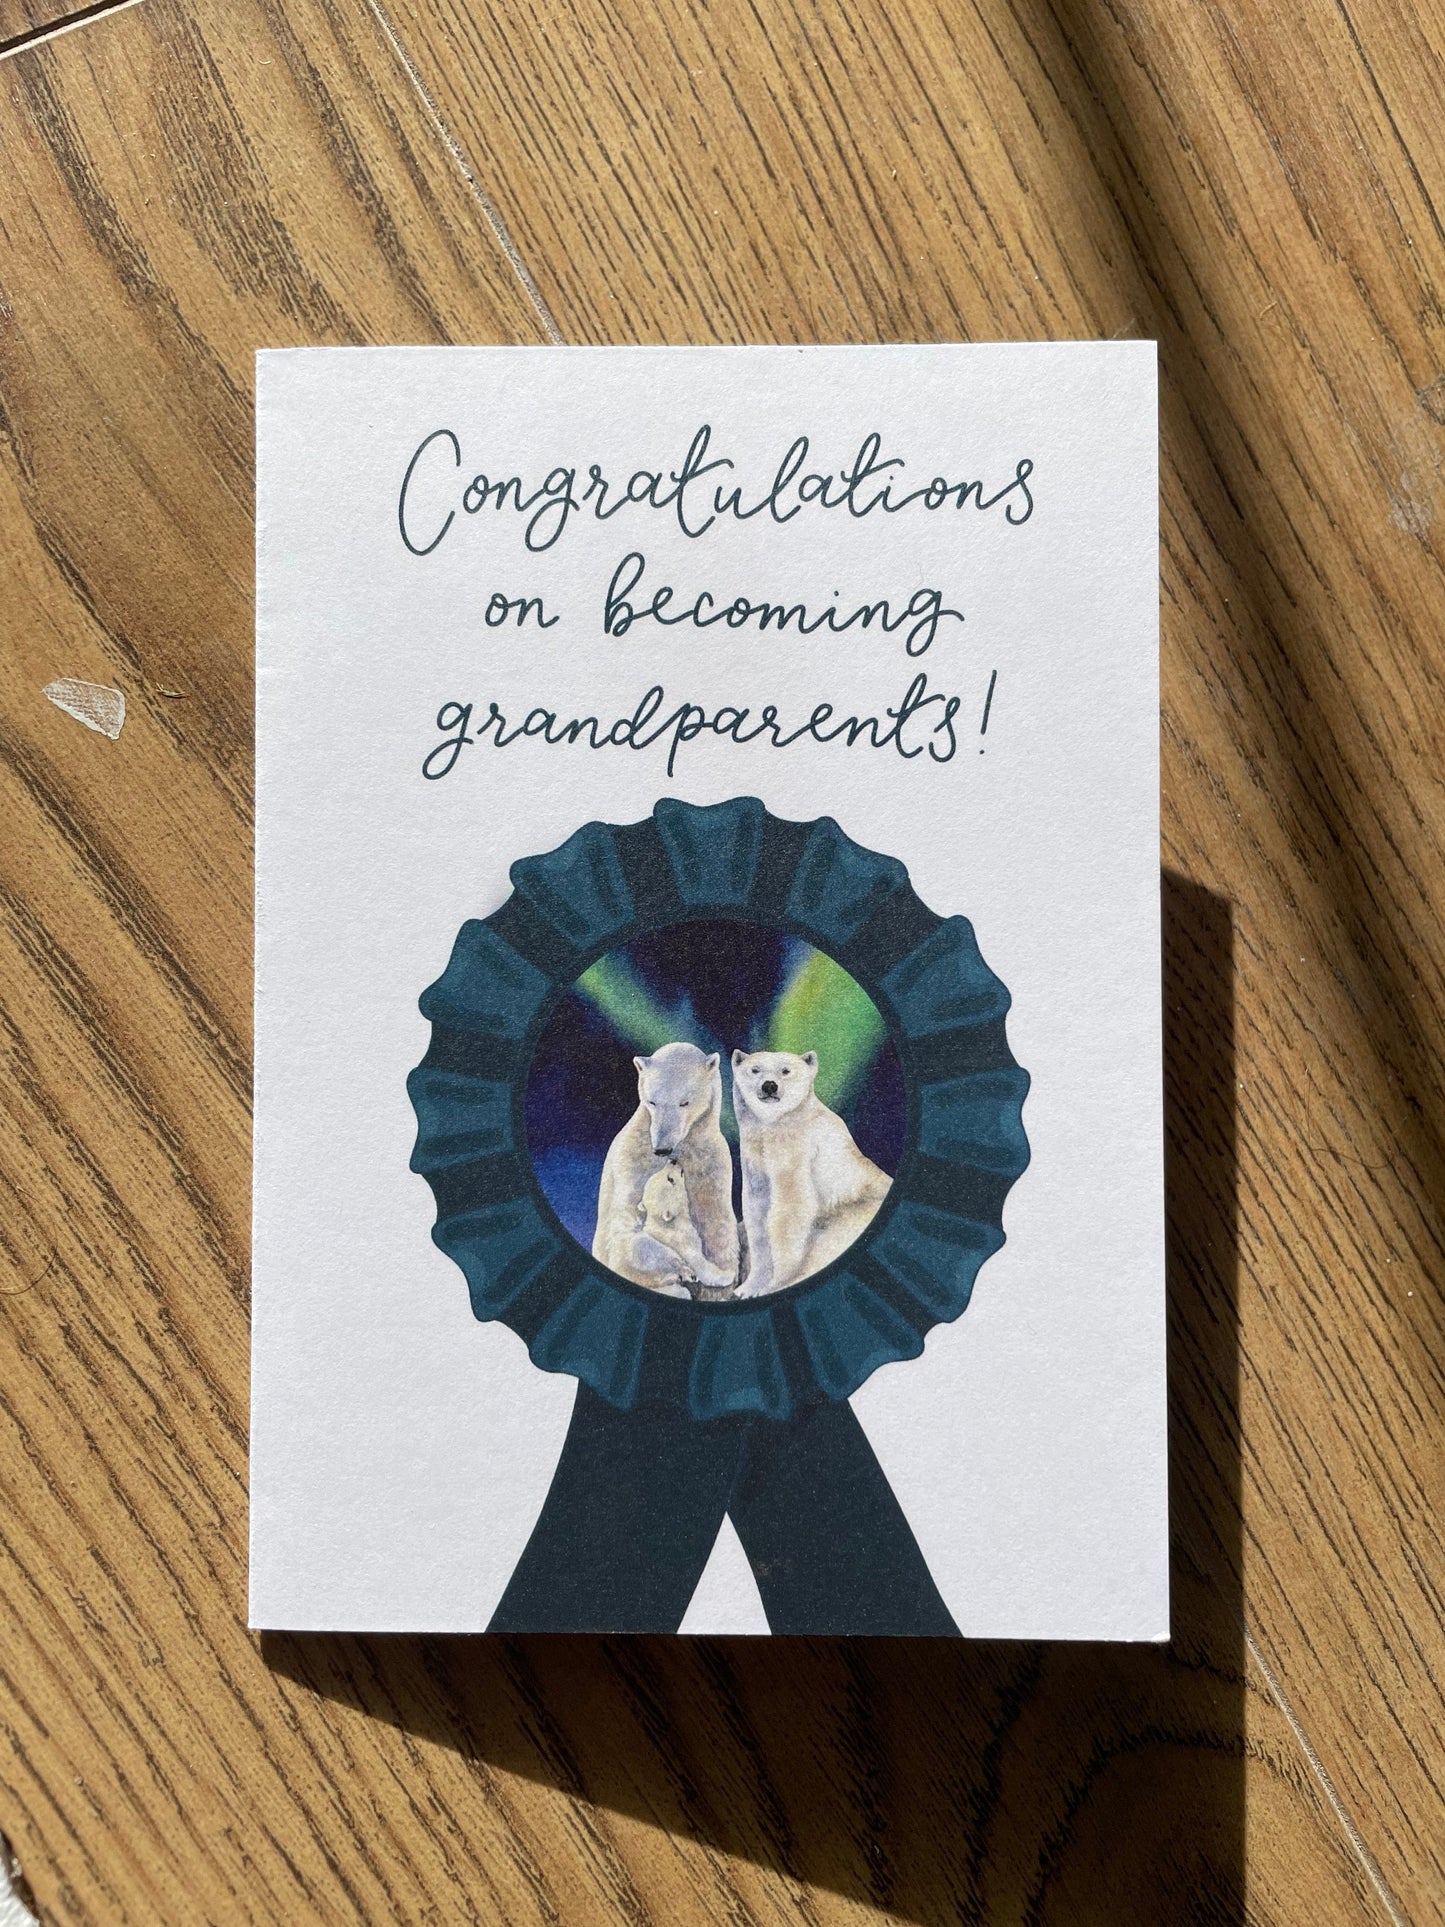 And Hope Designs Cards Congratulations on becoming grandparents card